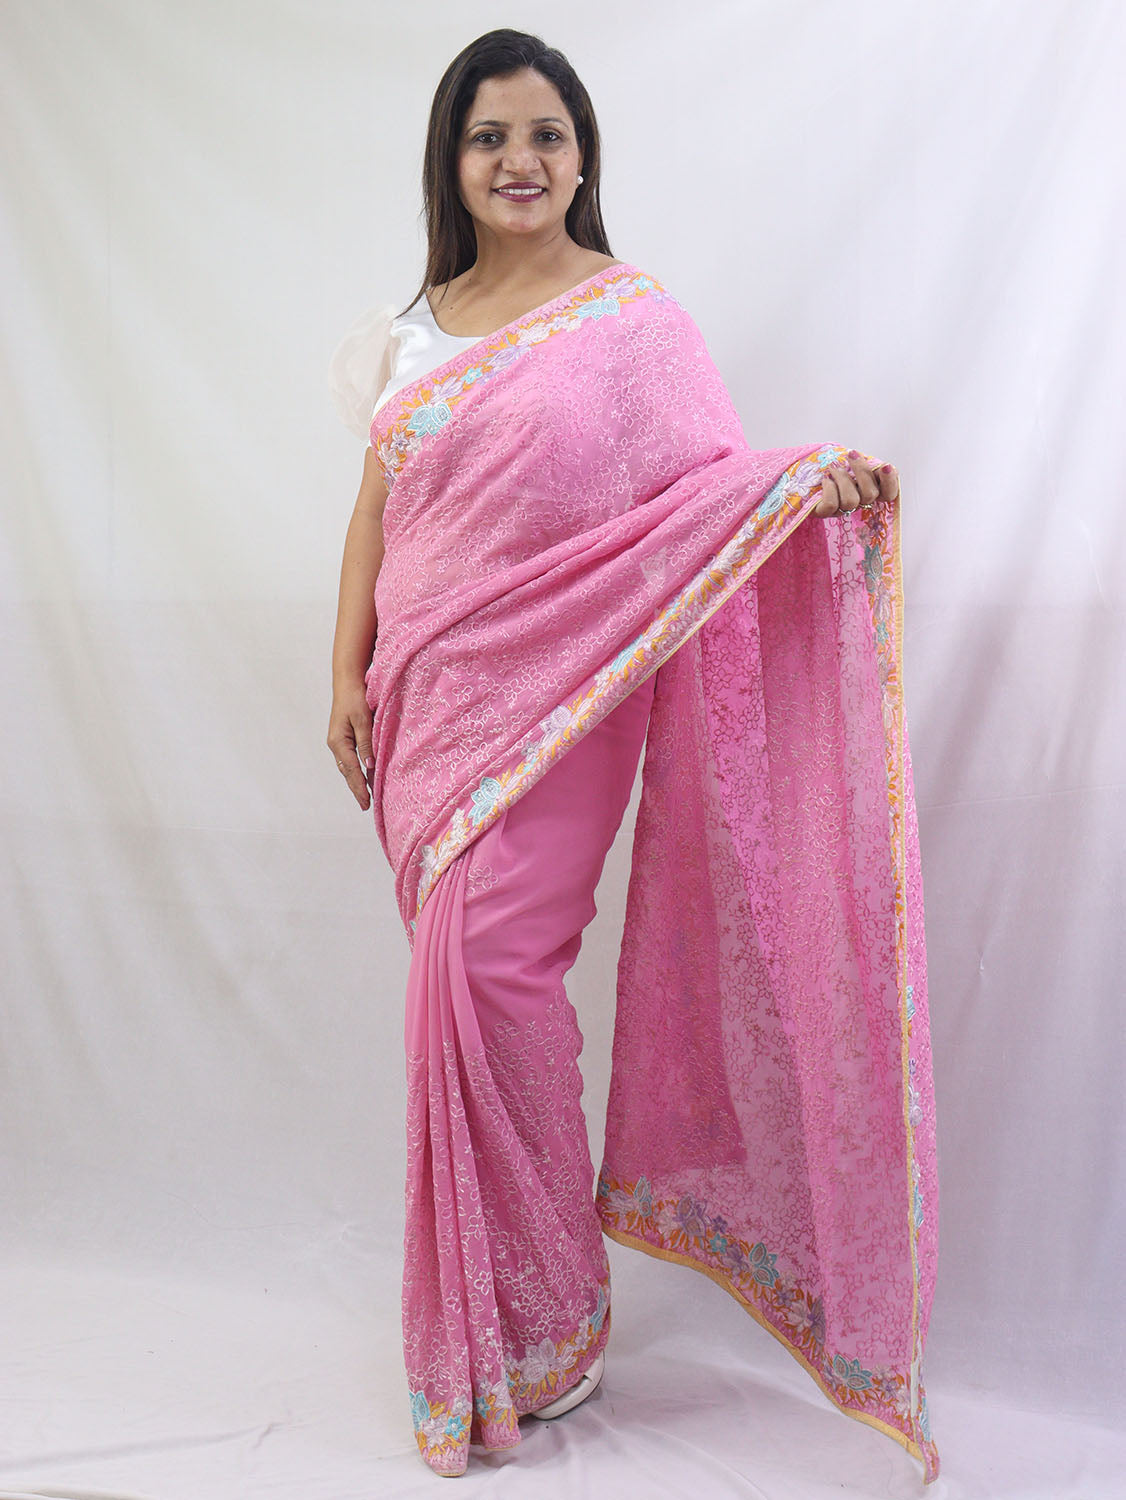 Stunning Pink Georgette Saree with Intricate Thread Work Embroidery - Luxurion World